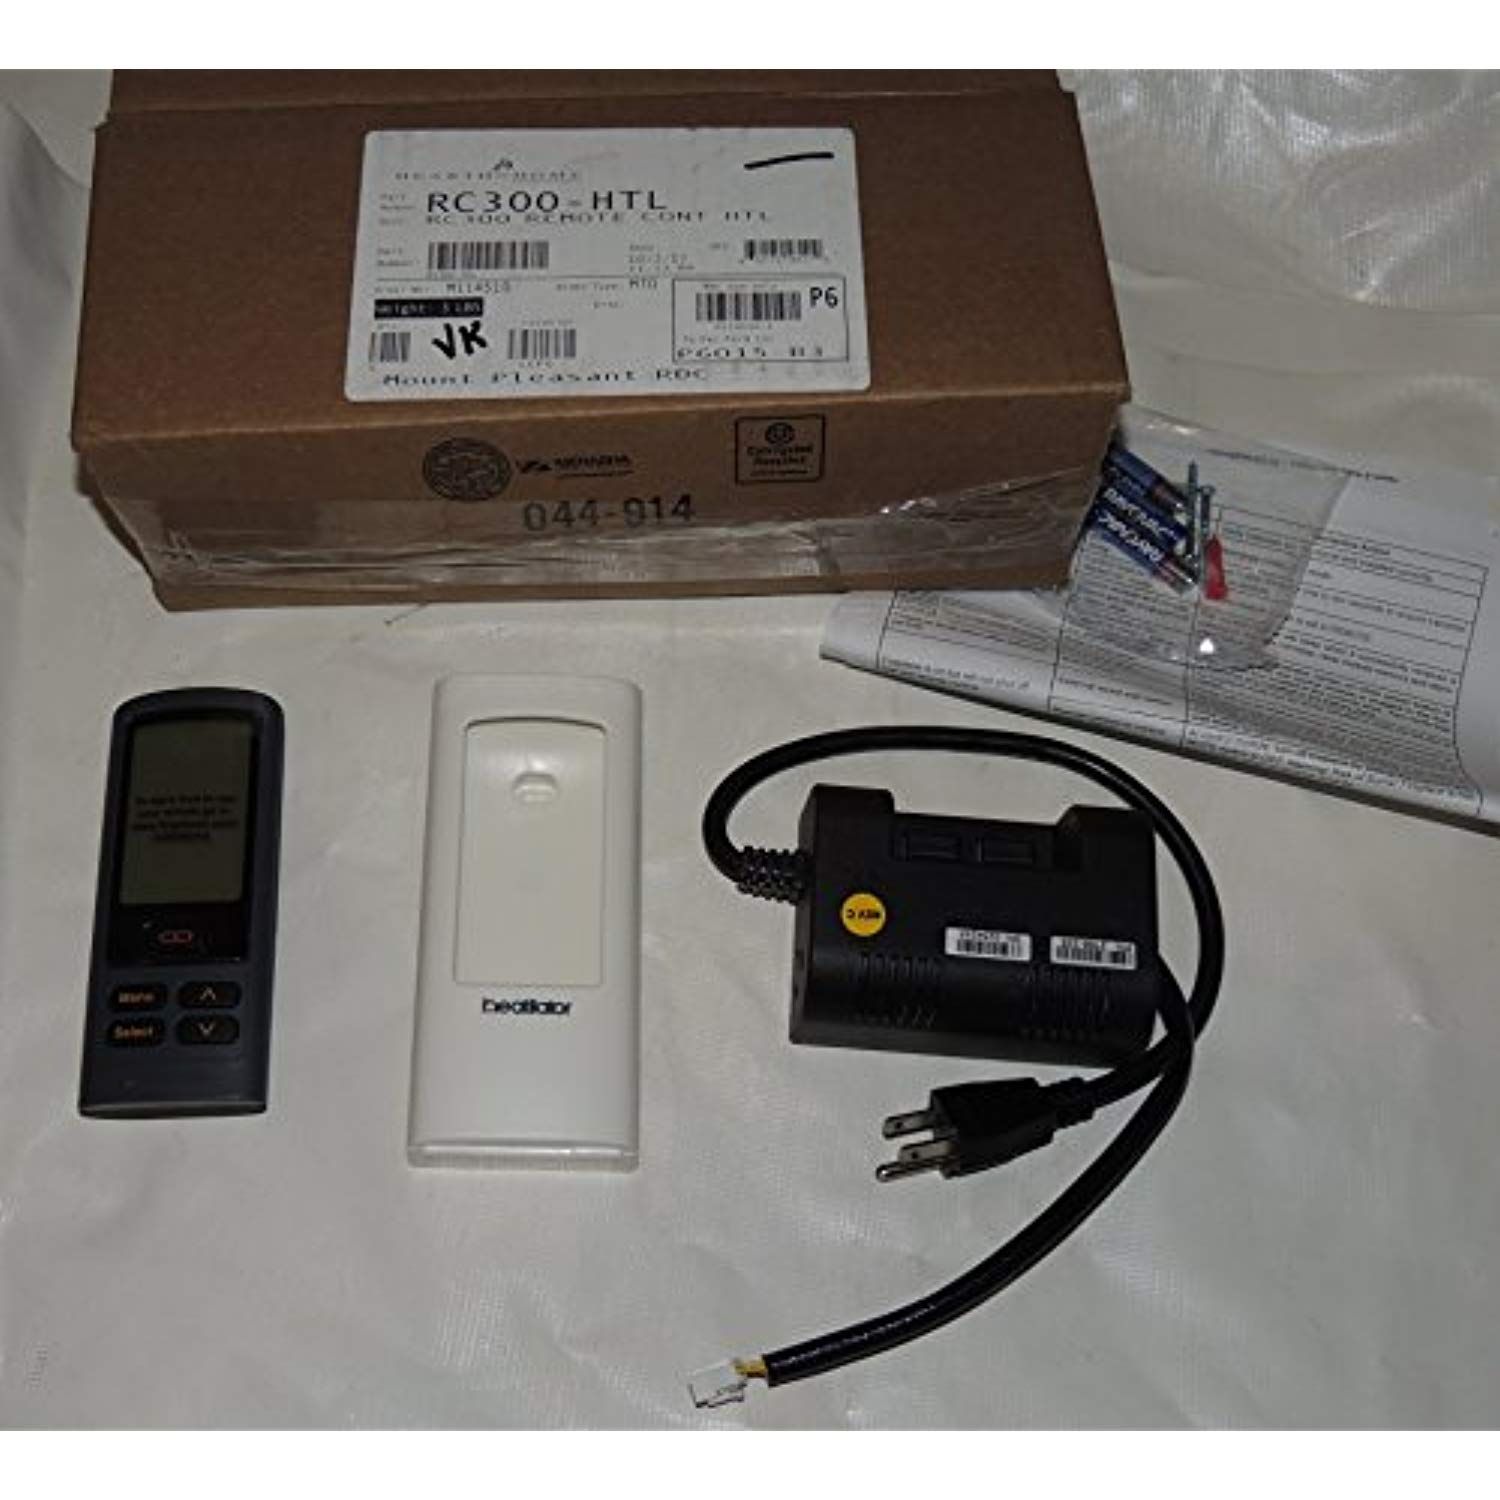 Fireplace Remote Fresh Heatilator Rc300 Htl Gas Fireplace and Insert Remote Control